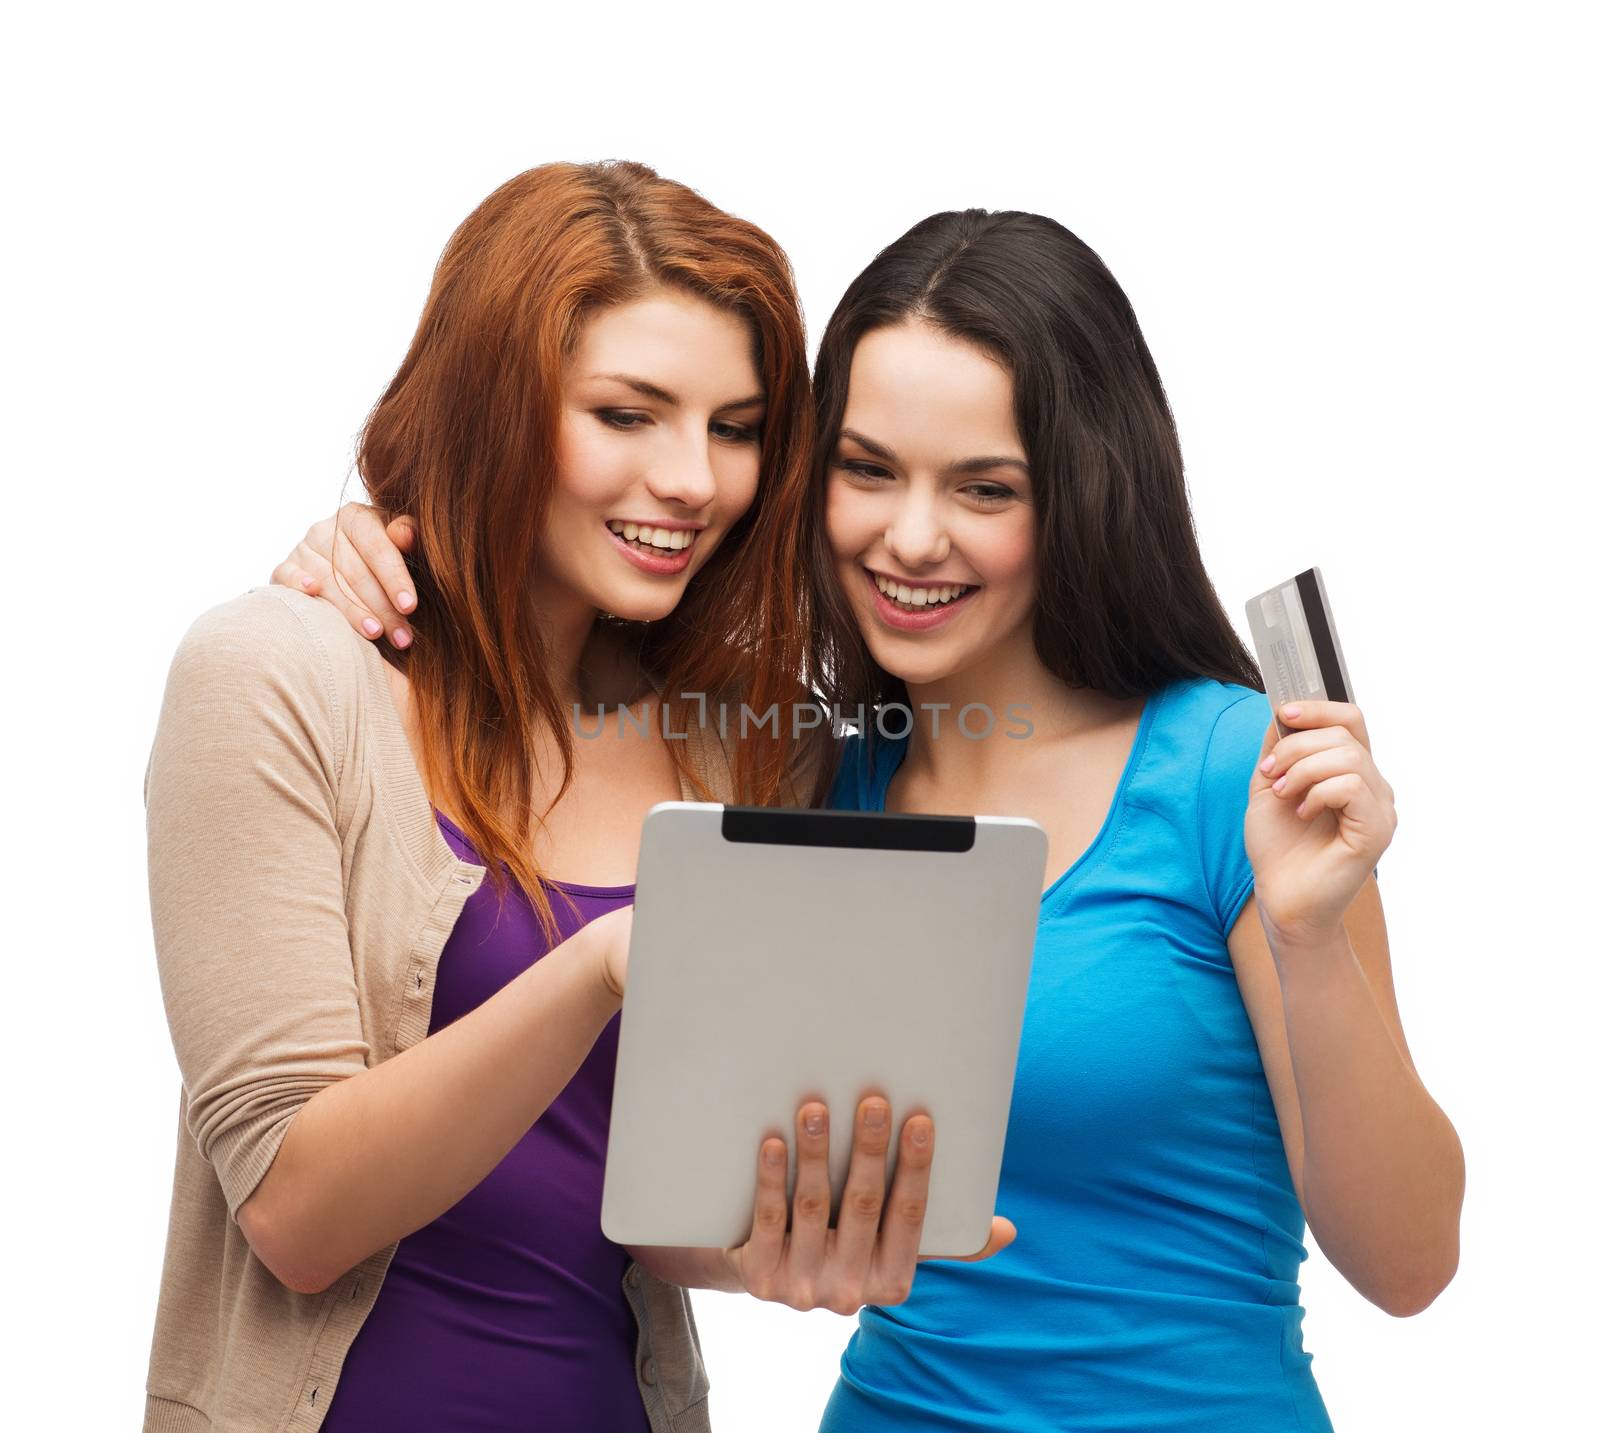 online shopping and technology concept - two smiling teenagers with tablet pc computer and credit card